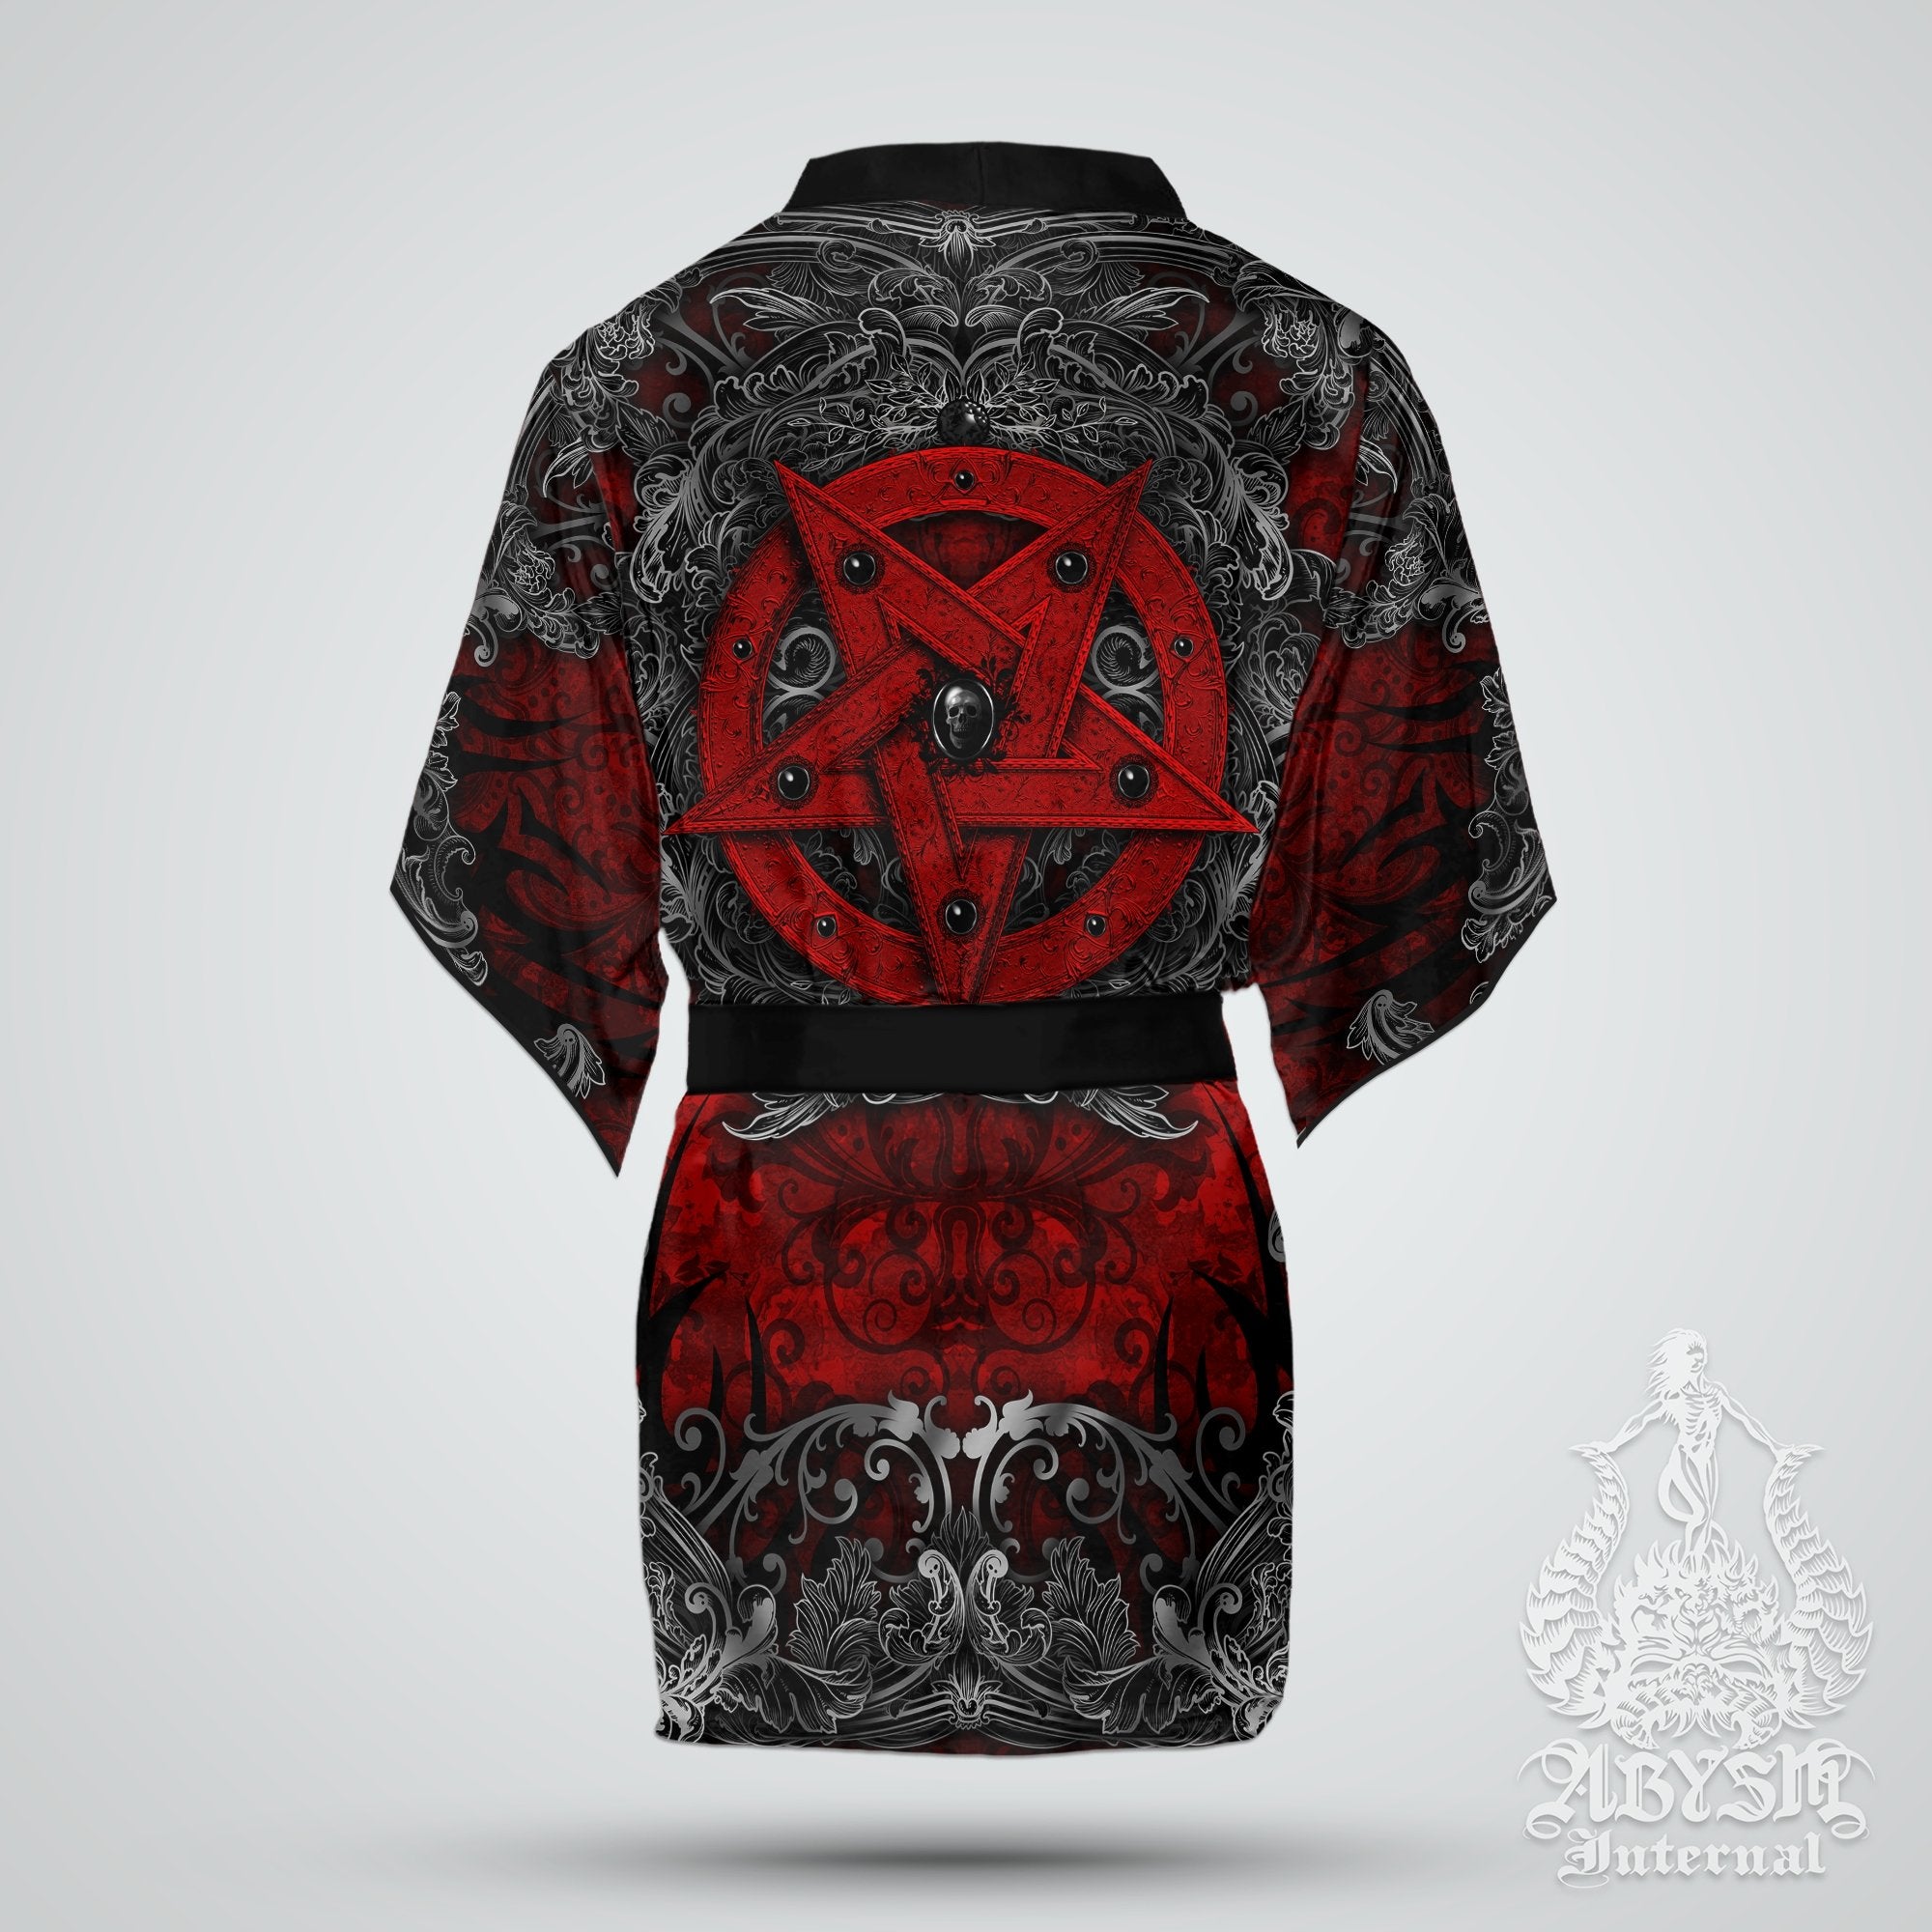 Pentagram Cover Up, Beach Outfit, Party Kimono, Metal Summer Festival Robe, Satanic Gothic Indie and Alternative Clothing, Unisex - Red - Abysm Internal